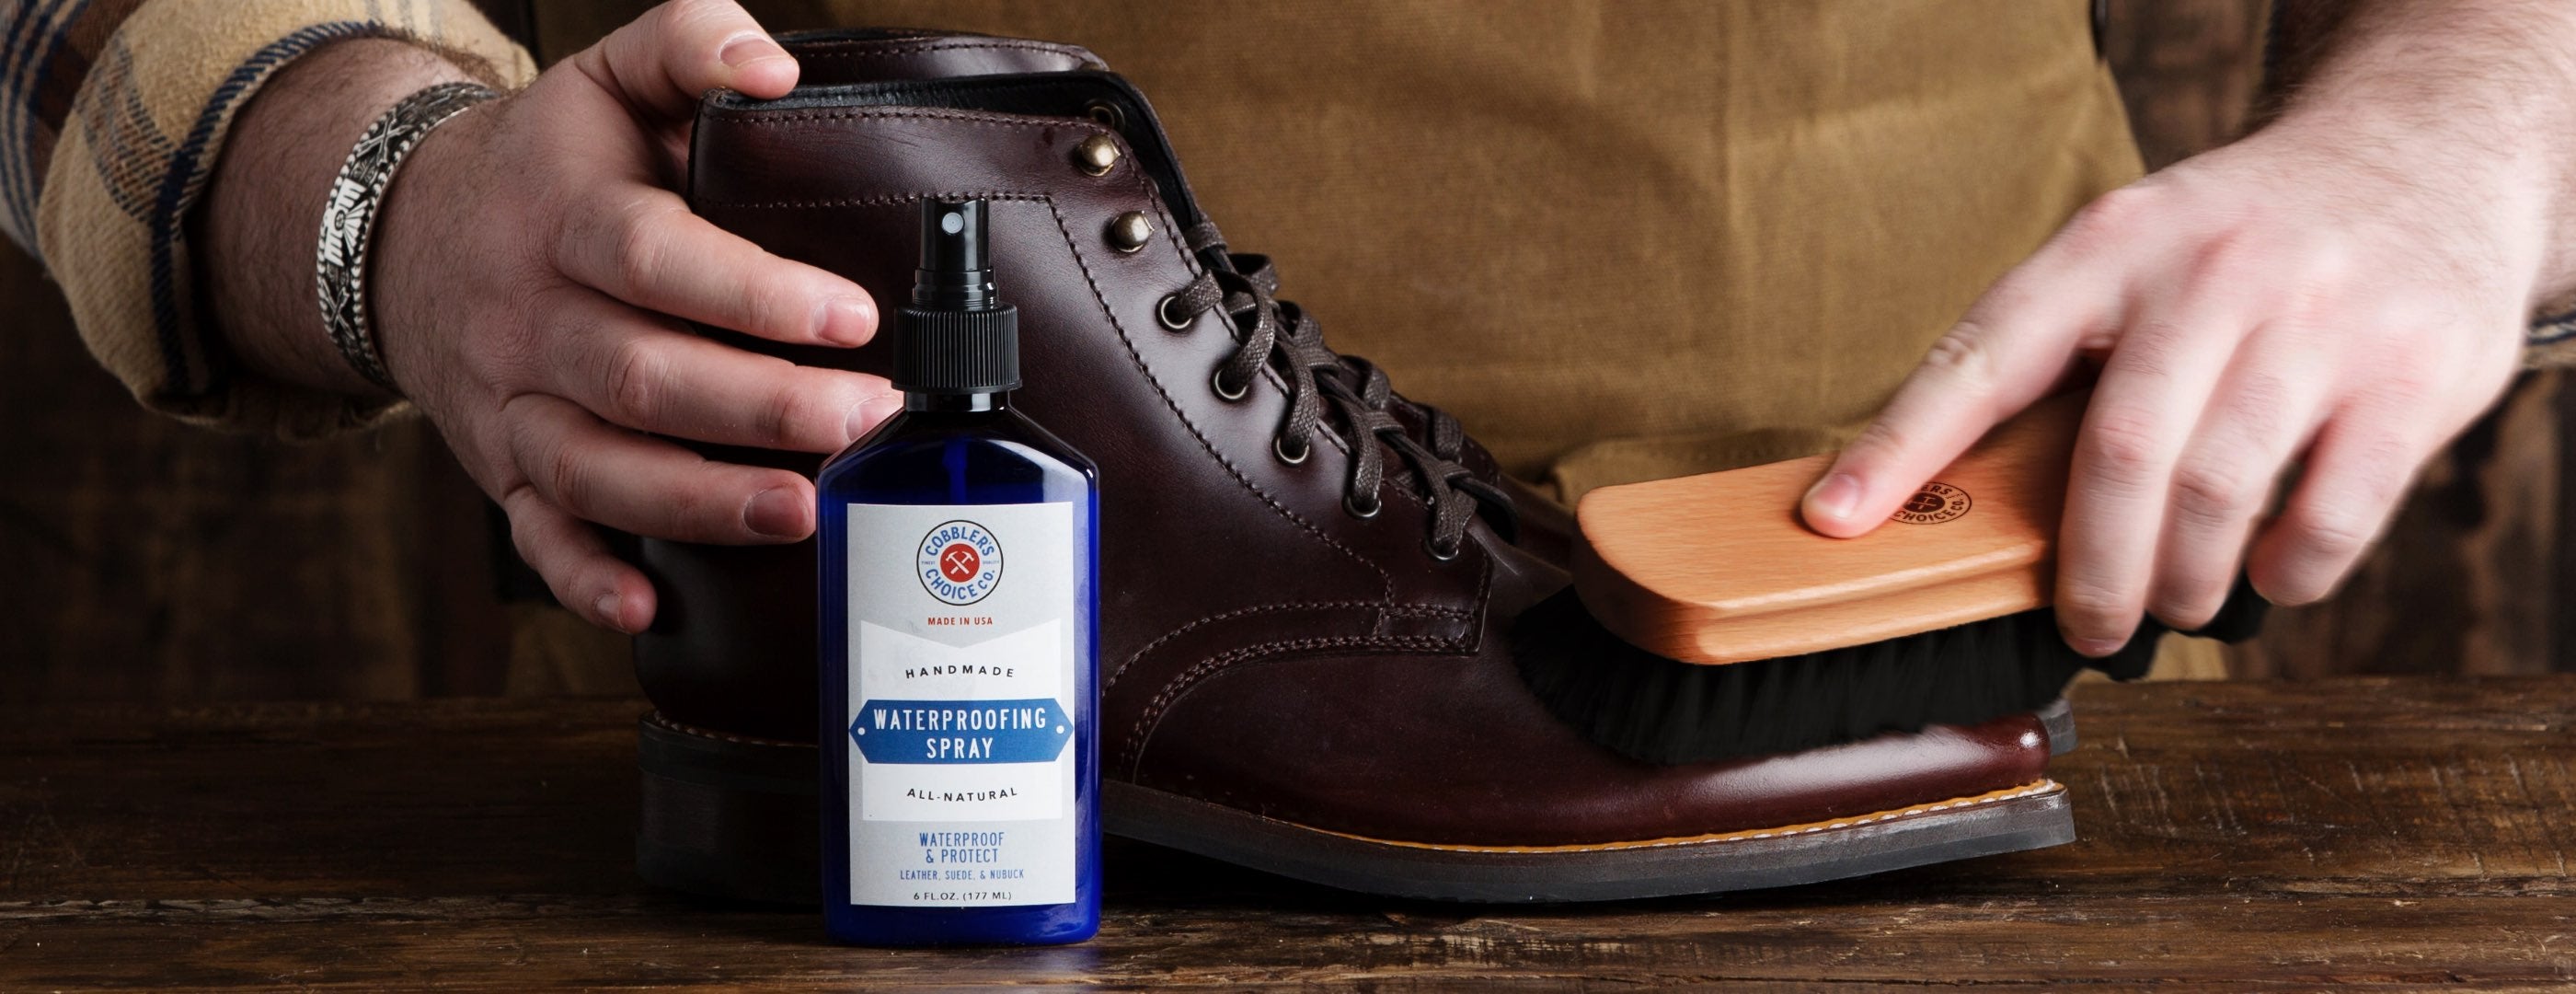 The Best Conditioner & Waterproofing Spray for Leather Bags